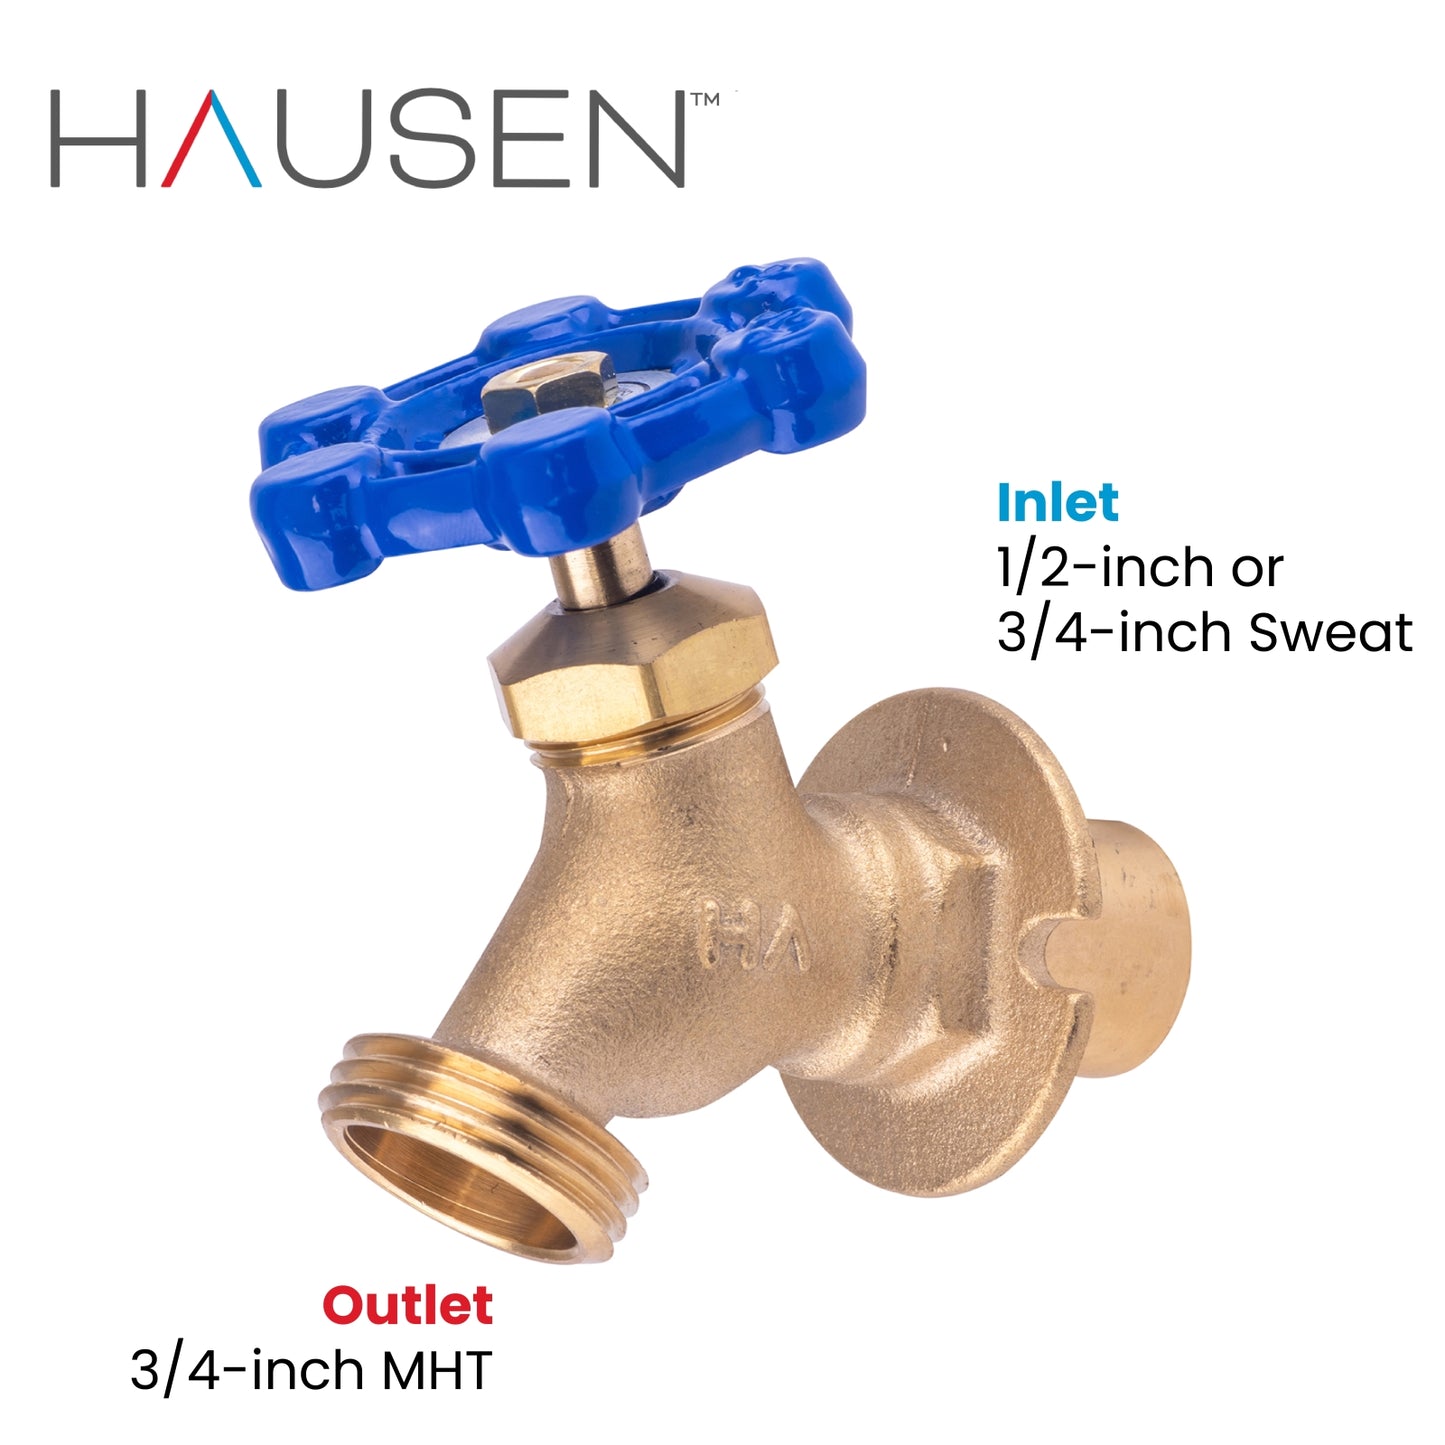 Hausen 1/2-inch or 3/4-inch Sweat x 3/4-inch MHT (Male Hose Thread) Brass Sillcock Valve with Handle Shutoff; cUPC Certified, Compatible with Standard Garden Hoses, 5-Pack